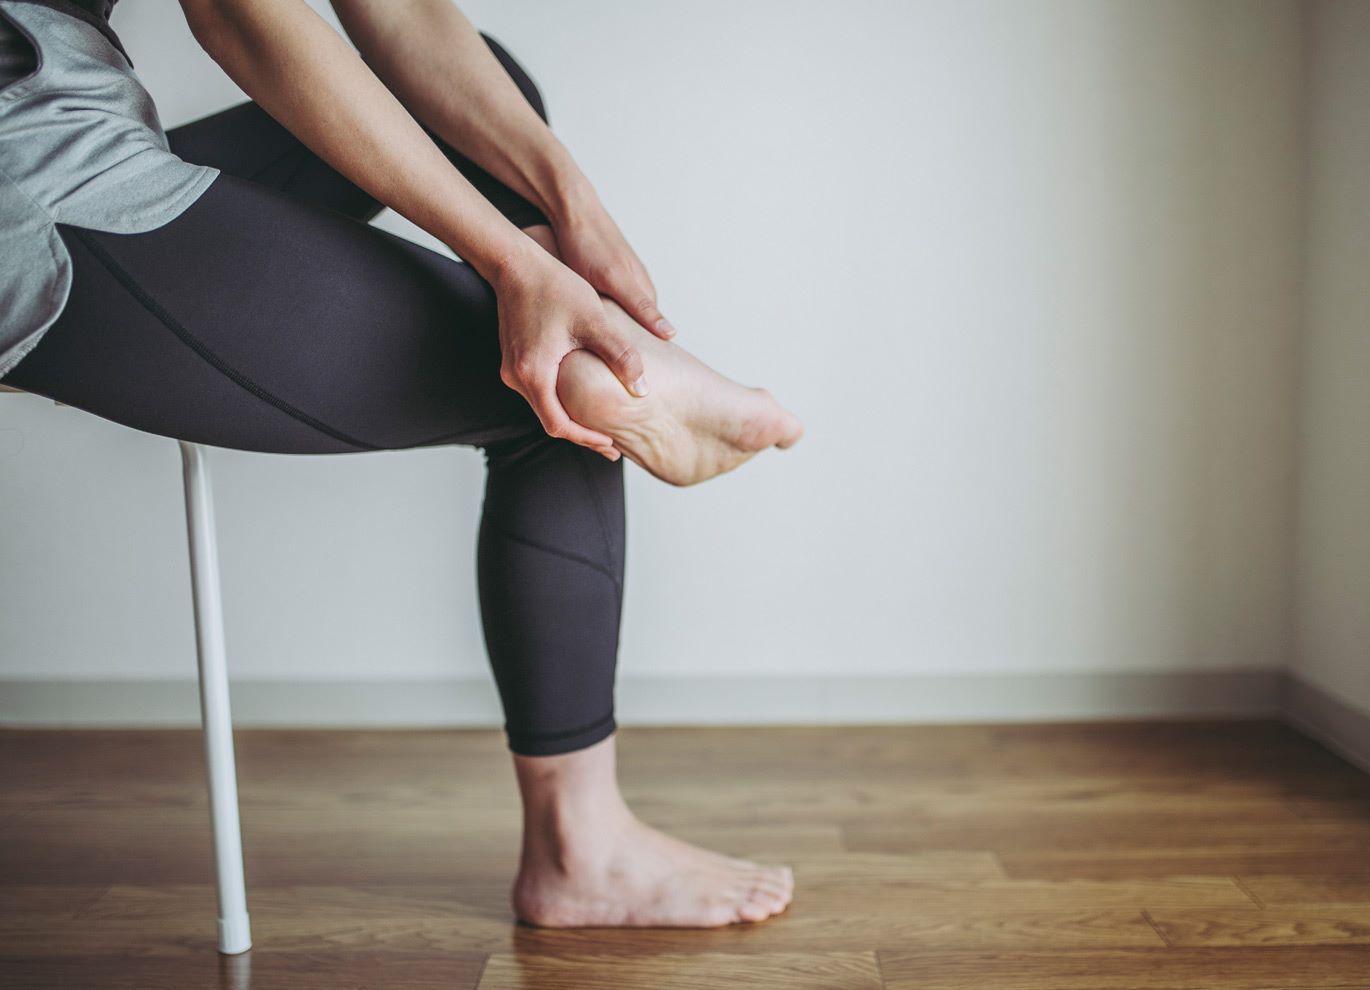 6 Stretches To Relieve Your Morning Foot Pain